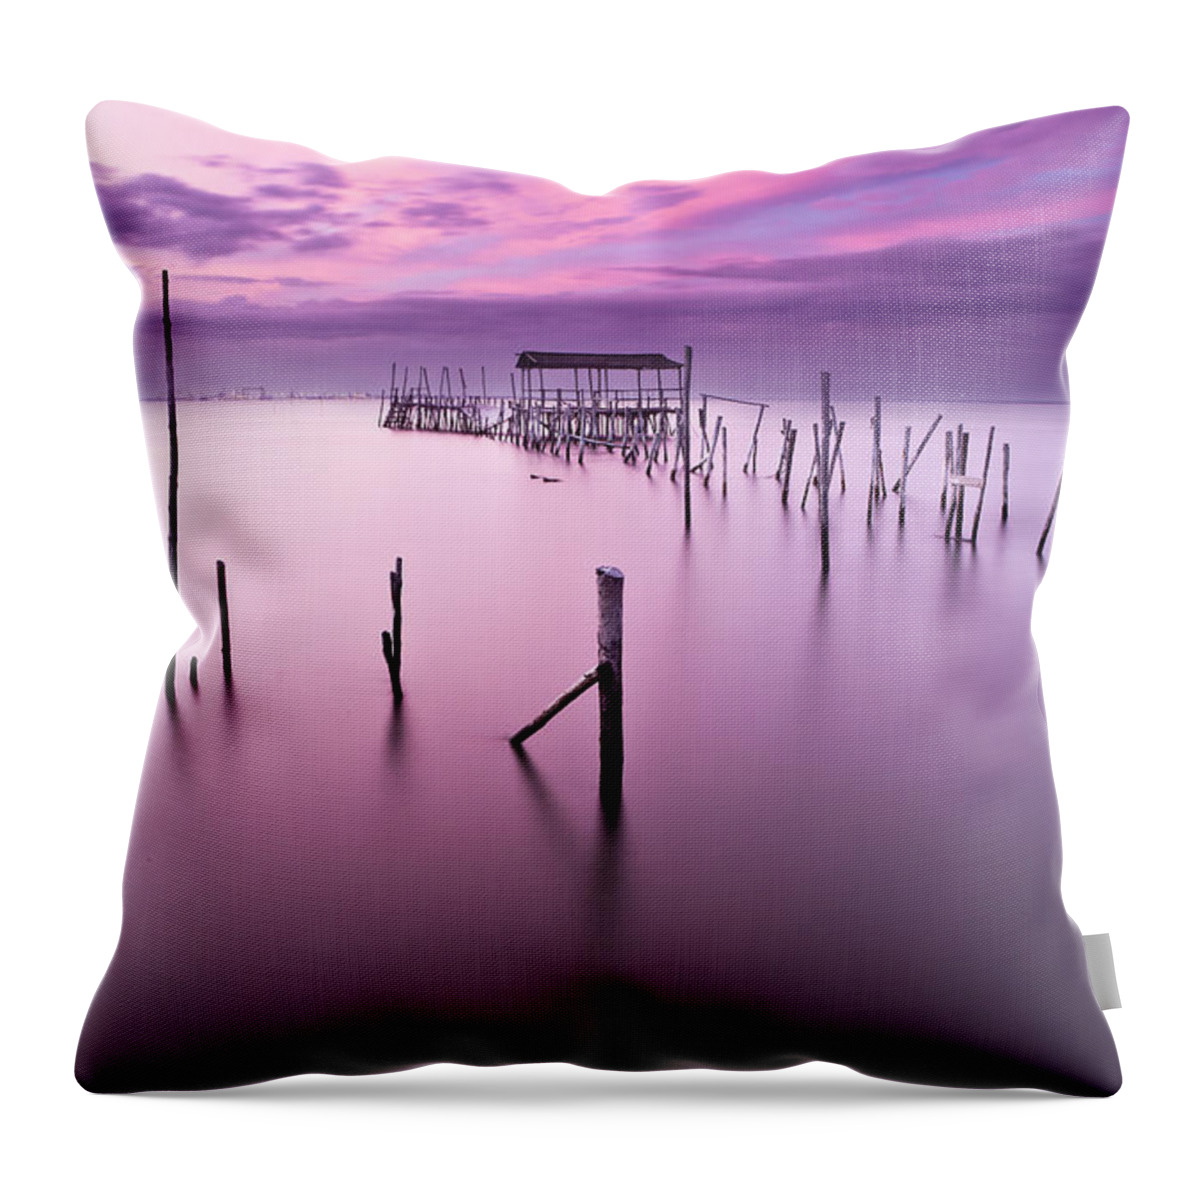 Water Throw Pillow featuring the photograph Abandoned by Jorge Maia